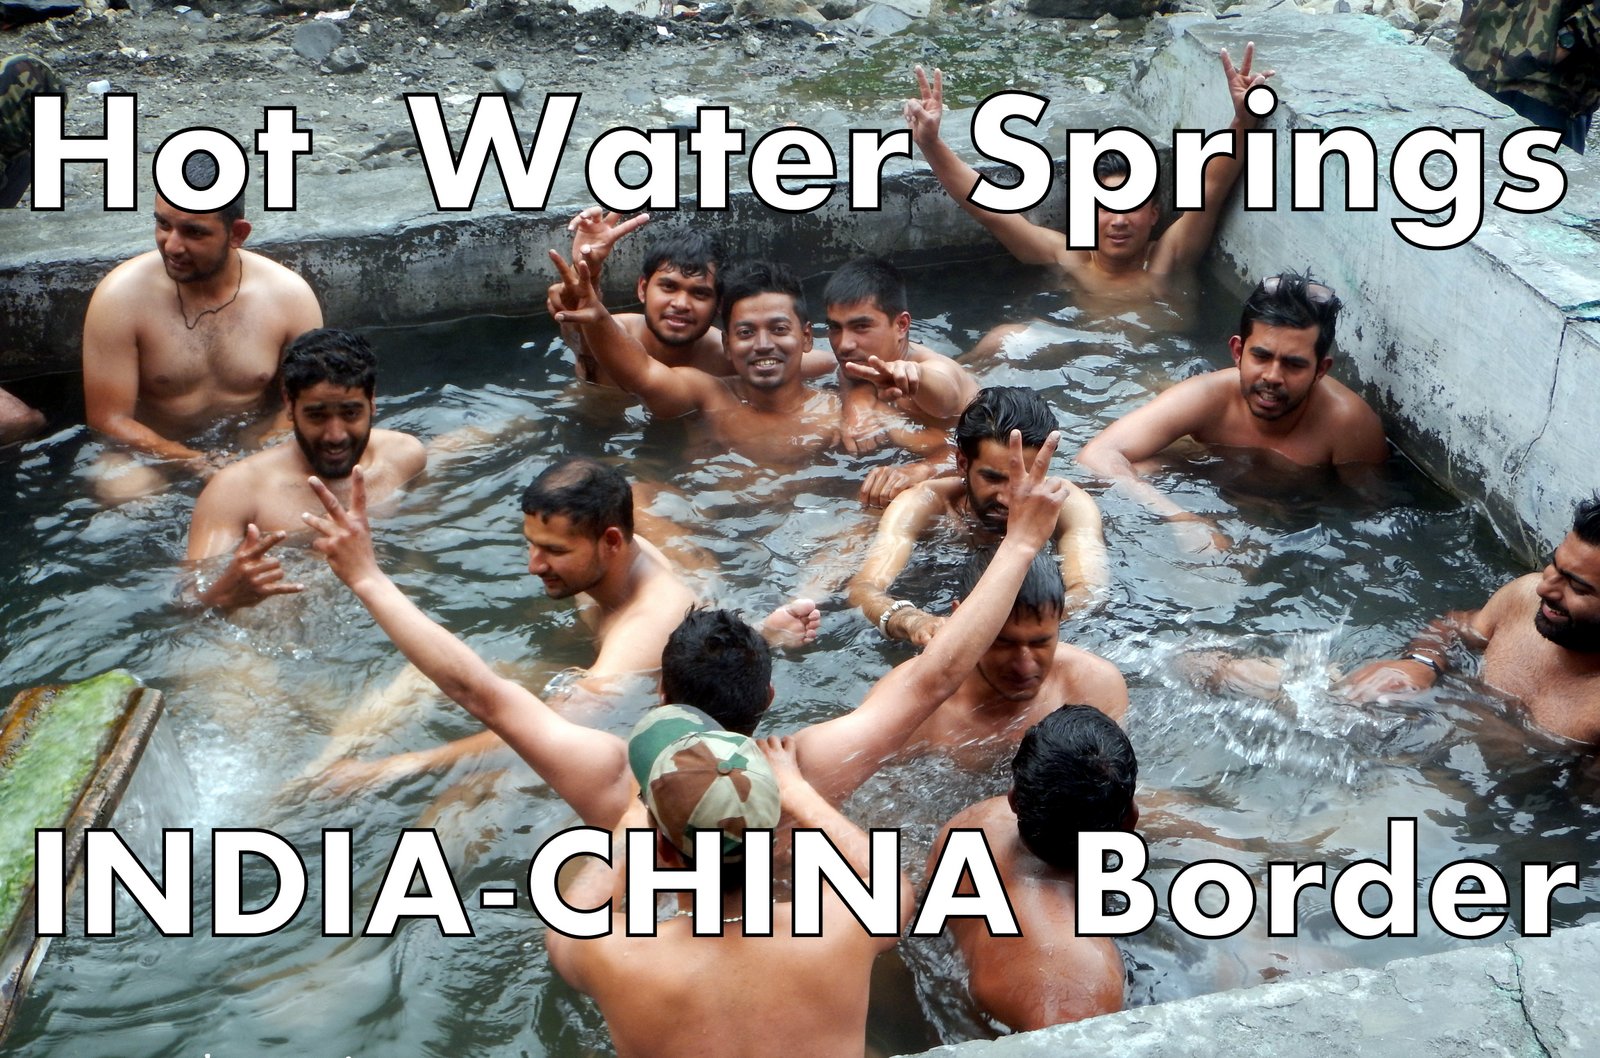 sticky hot water springs near india china border